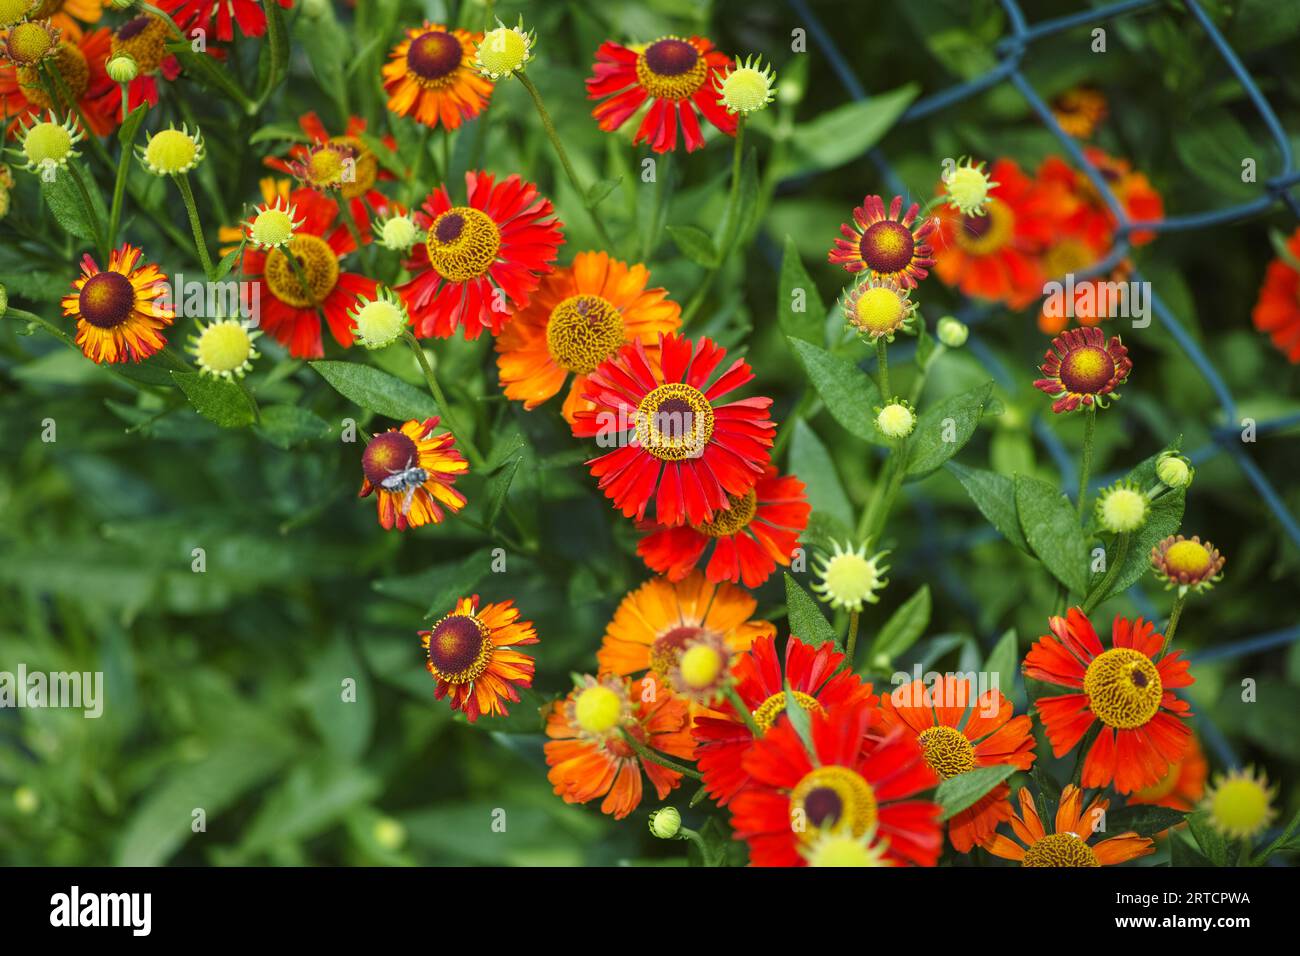 Red Helenium autumnales (common sneezeweed) flowering in the garden near a chain link fence Stock Photo